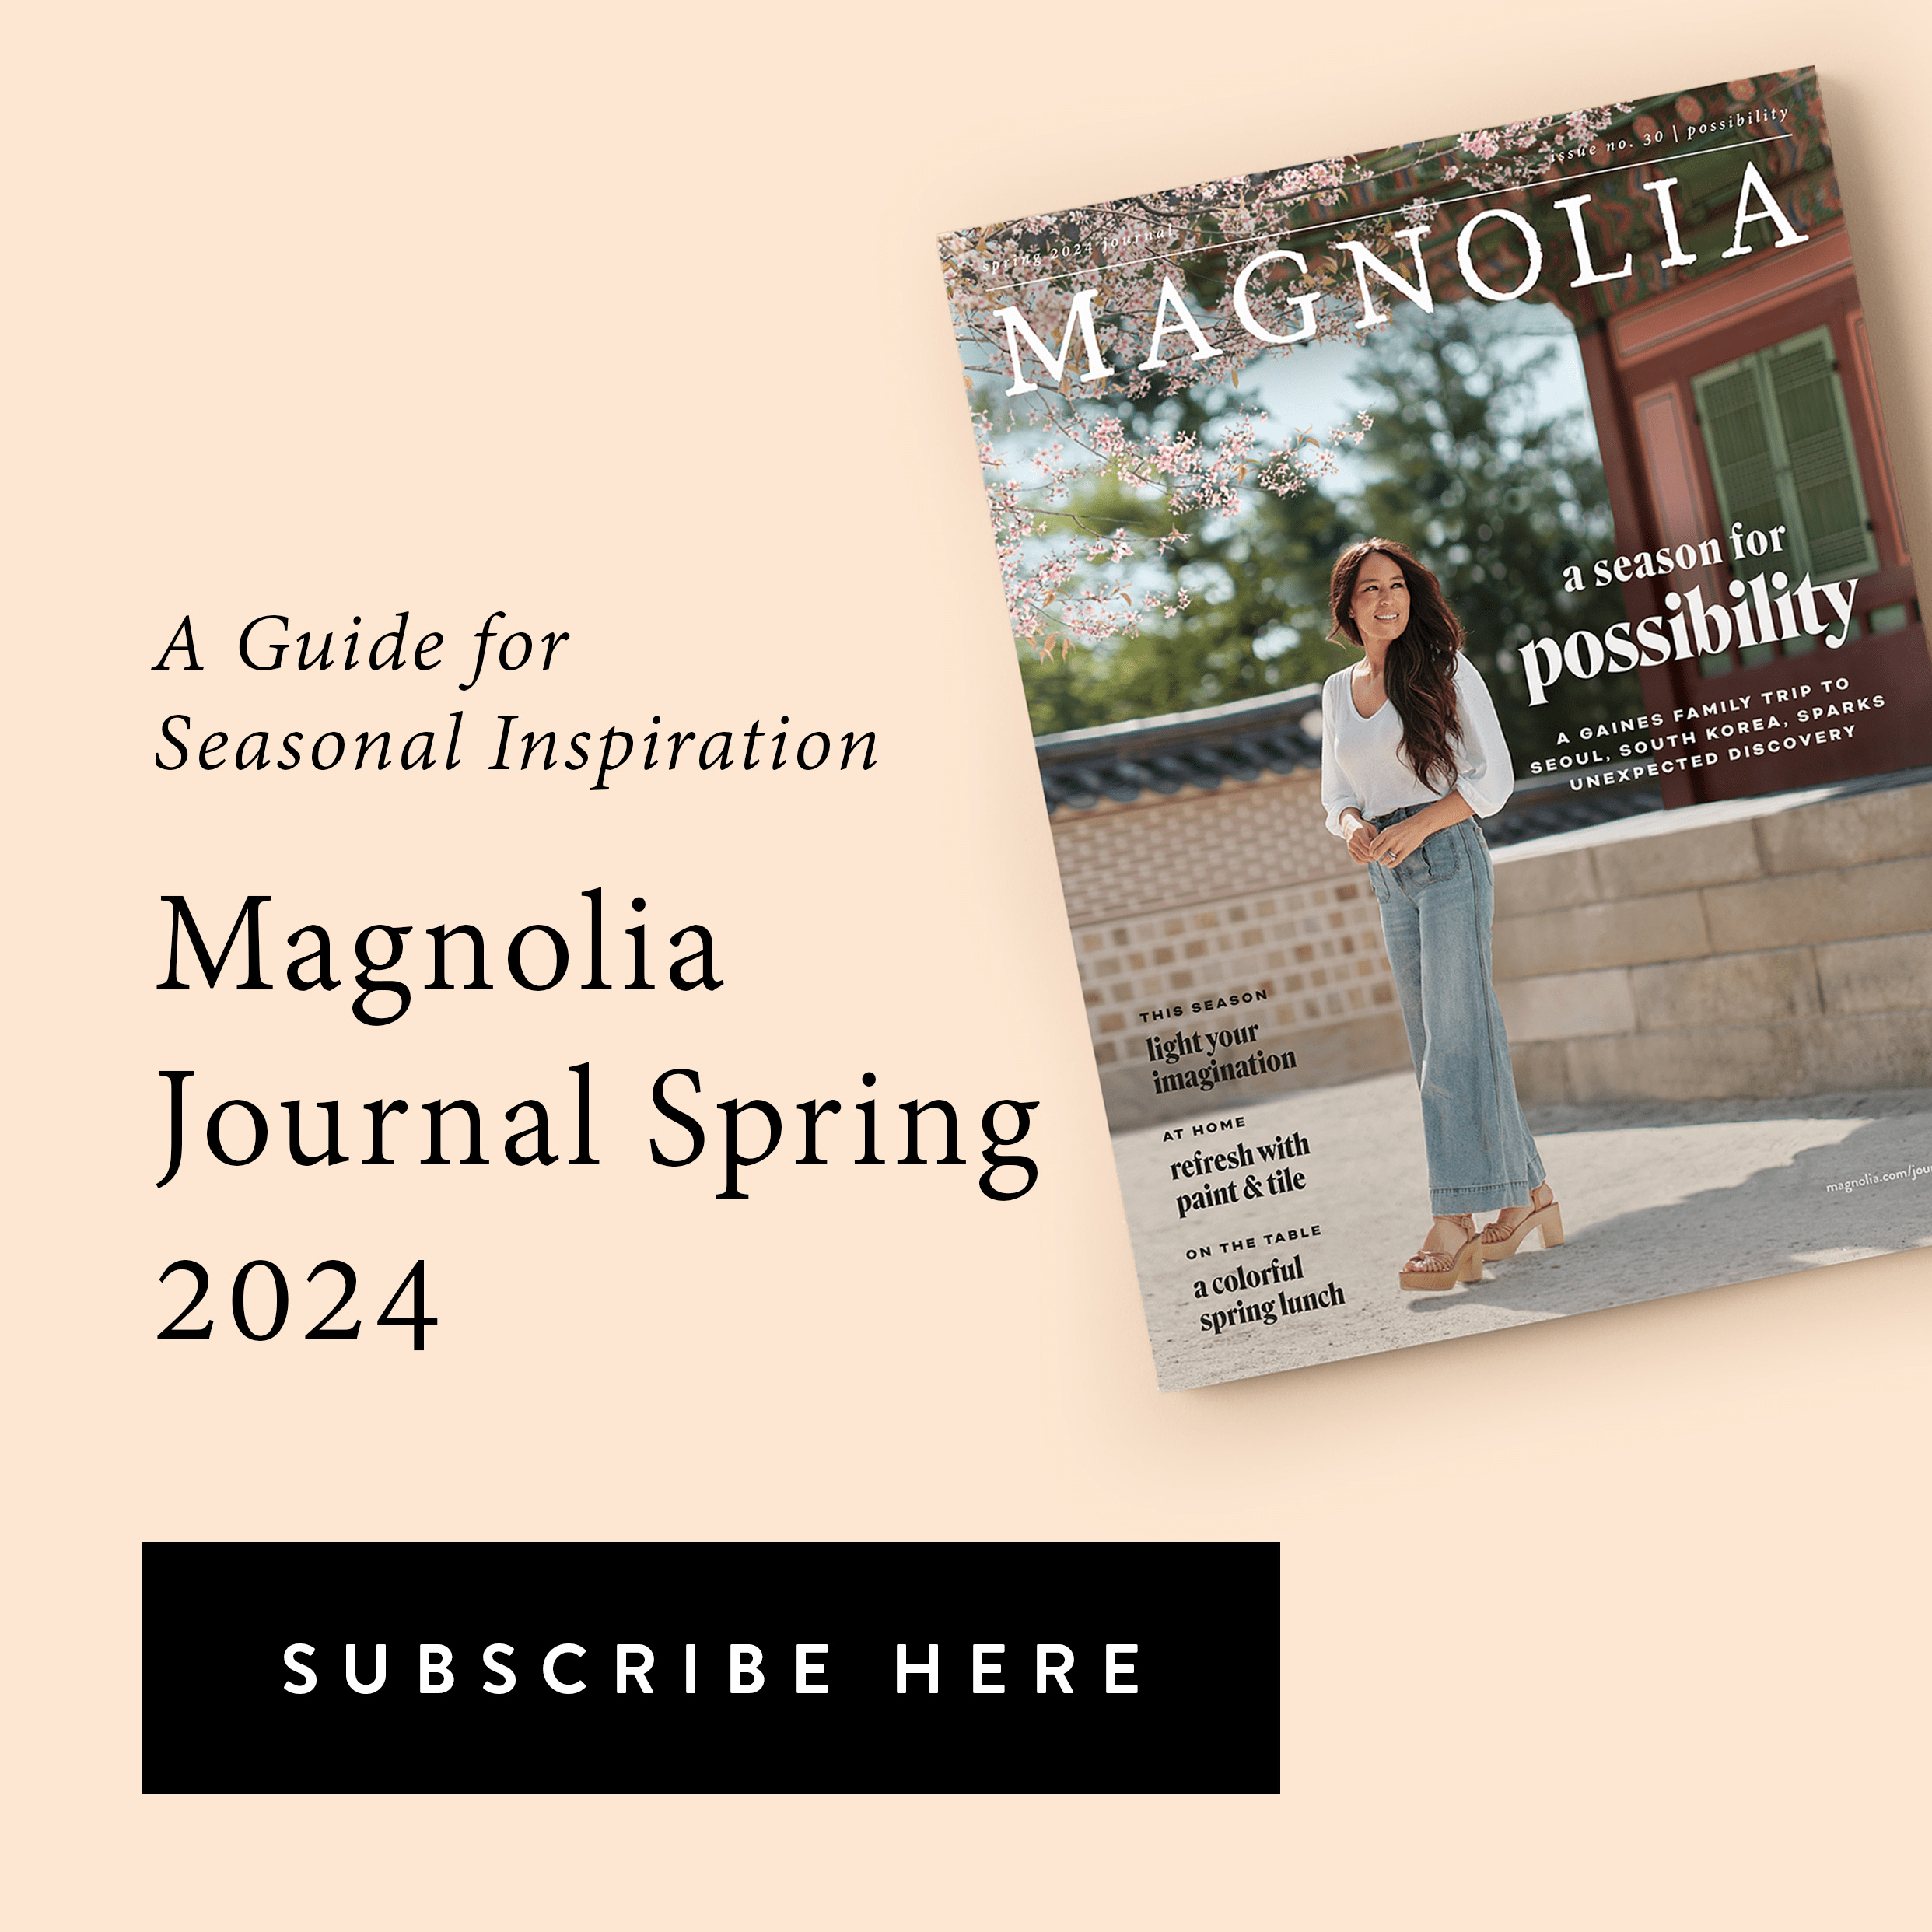 A Guide for Seasonal Inspiration - Magnolia Journal Spring 2024. Subscribe Here